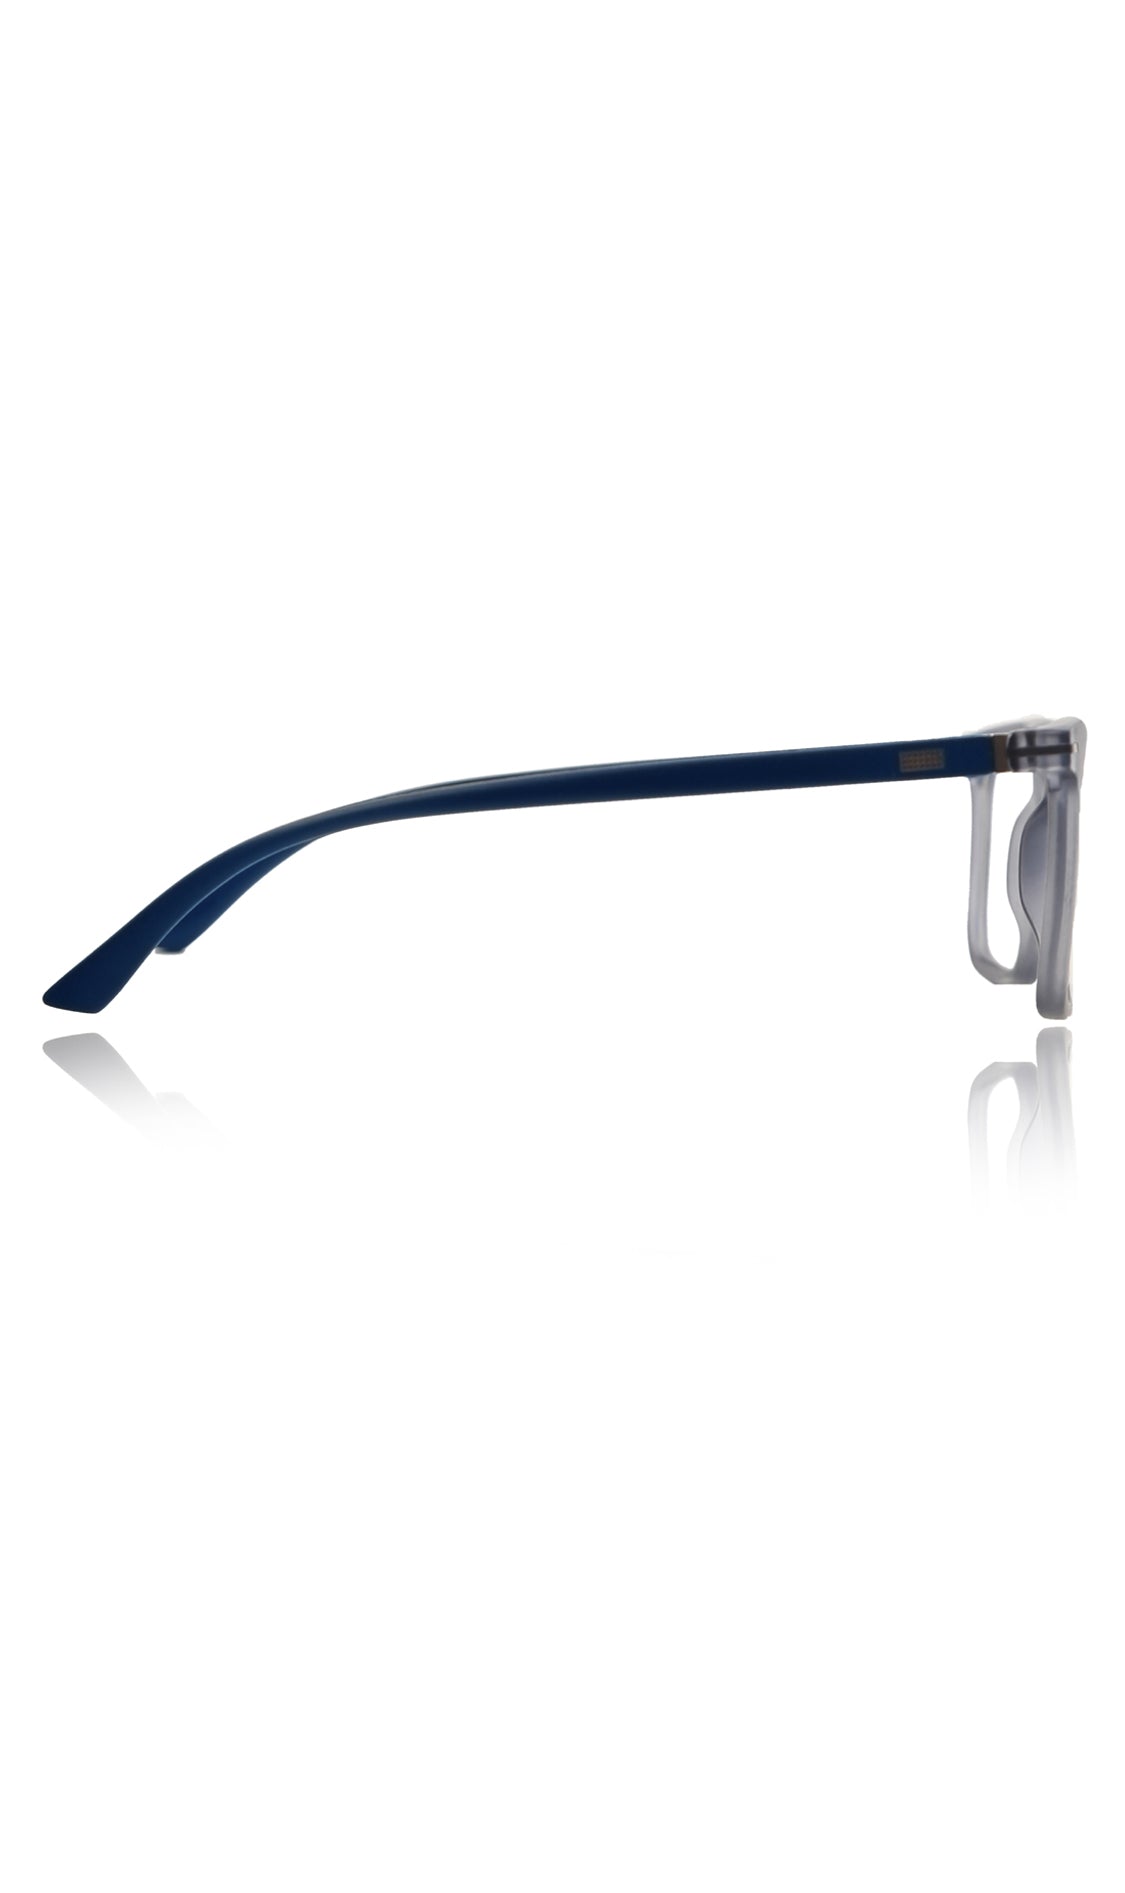 Jodykoes® Colour Frame Series: Stylish Square Spectacle Frames with Blue Ray Protection and Anti-Glare Glasses for Men and Women (Frosted Grey Blue) - Jodykoes ®